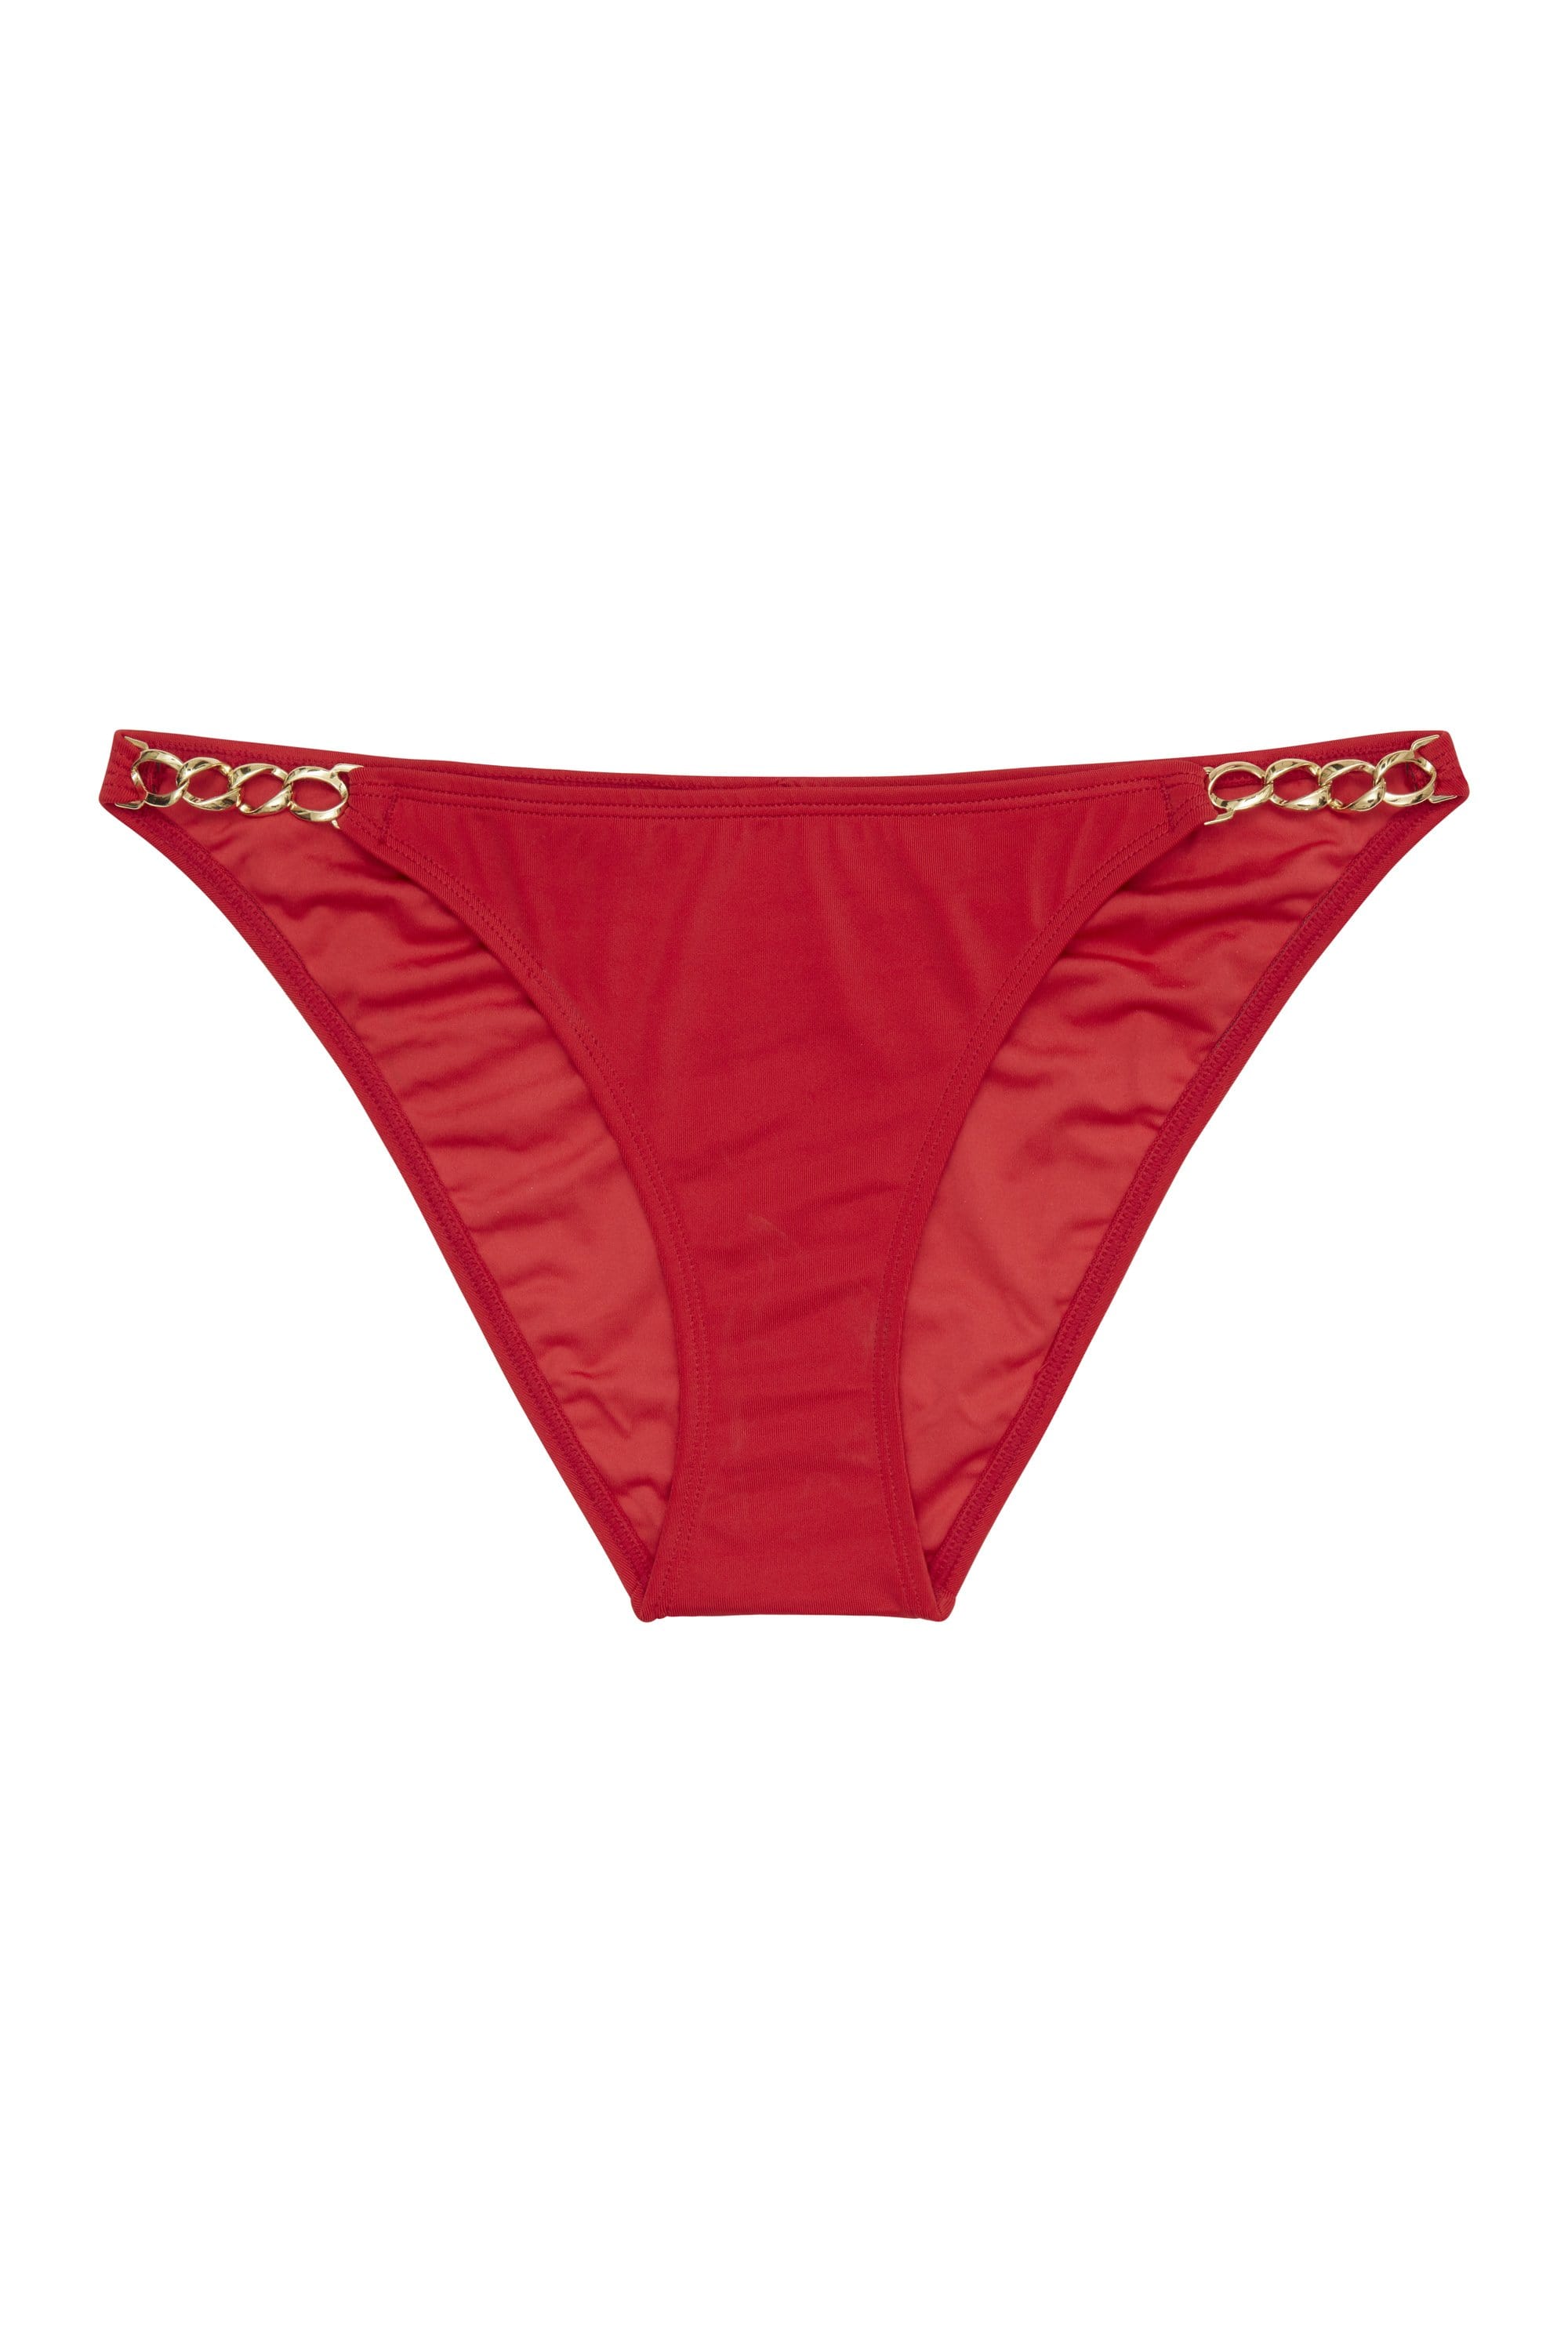 Wolf & Whistle Red chain hipster brief